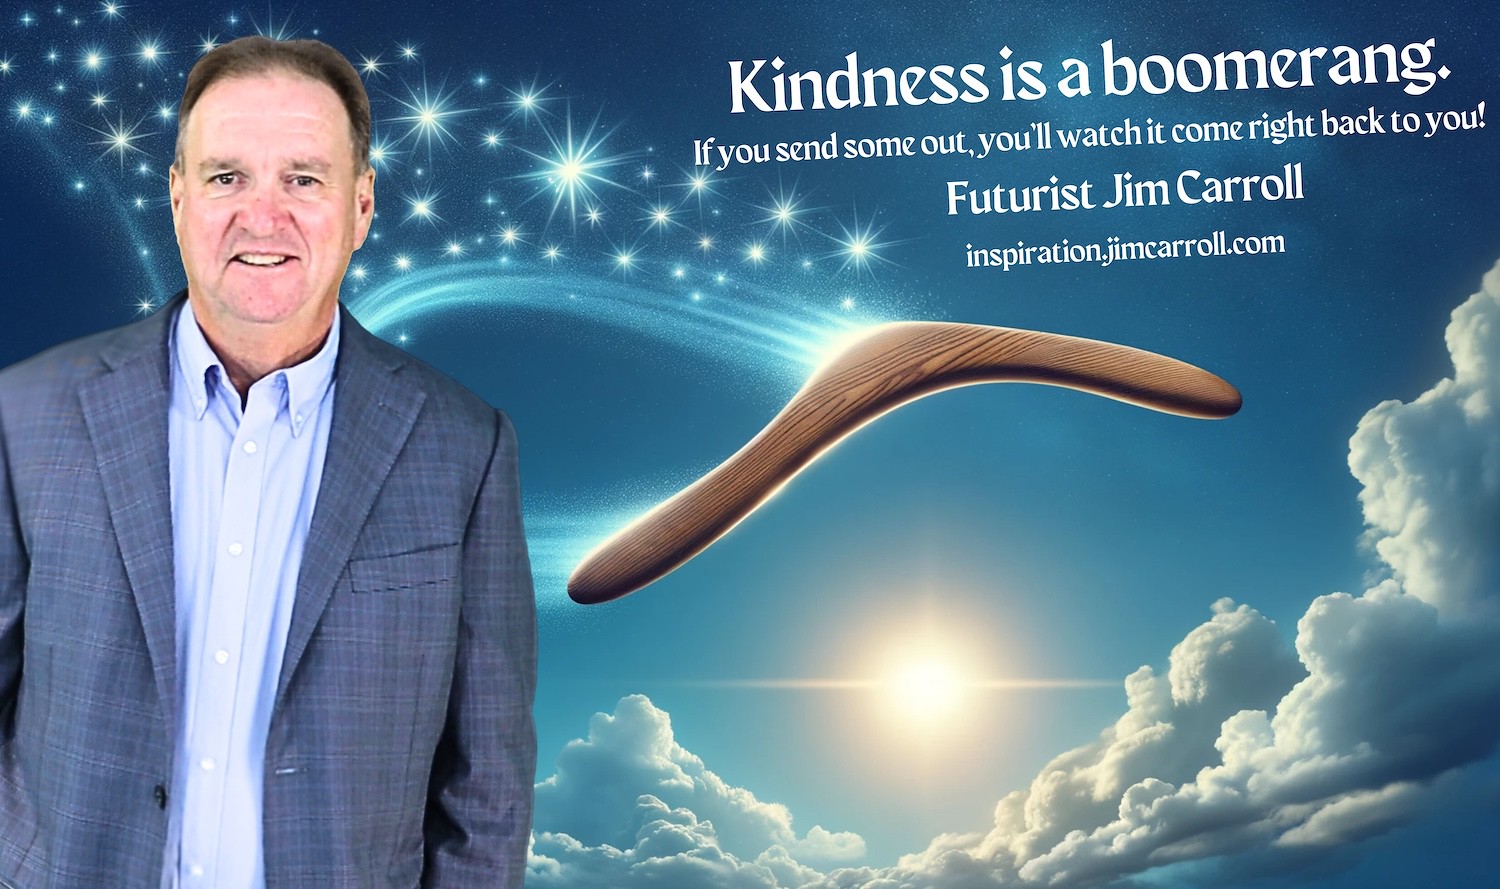 "Kindness is a boomerang. If you send some out, you'll watch it come right back to you!" - Futurist Jim Carroll